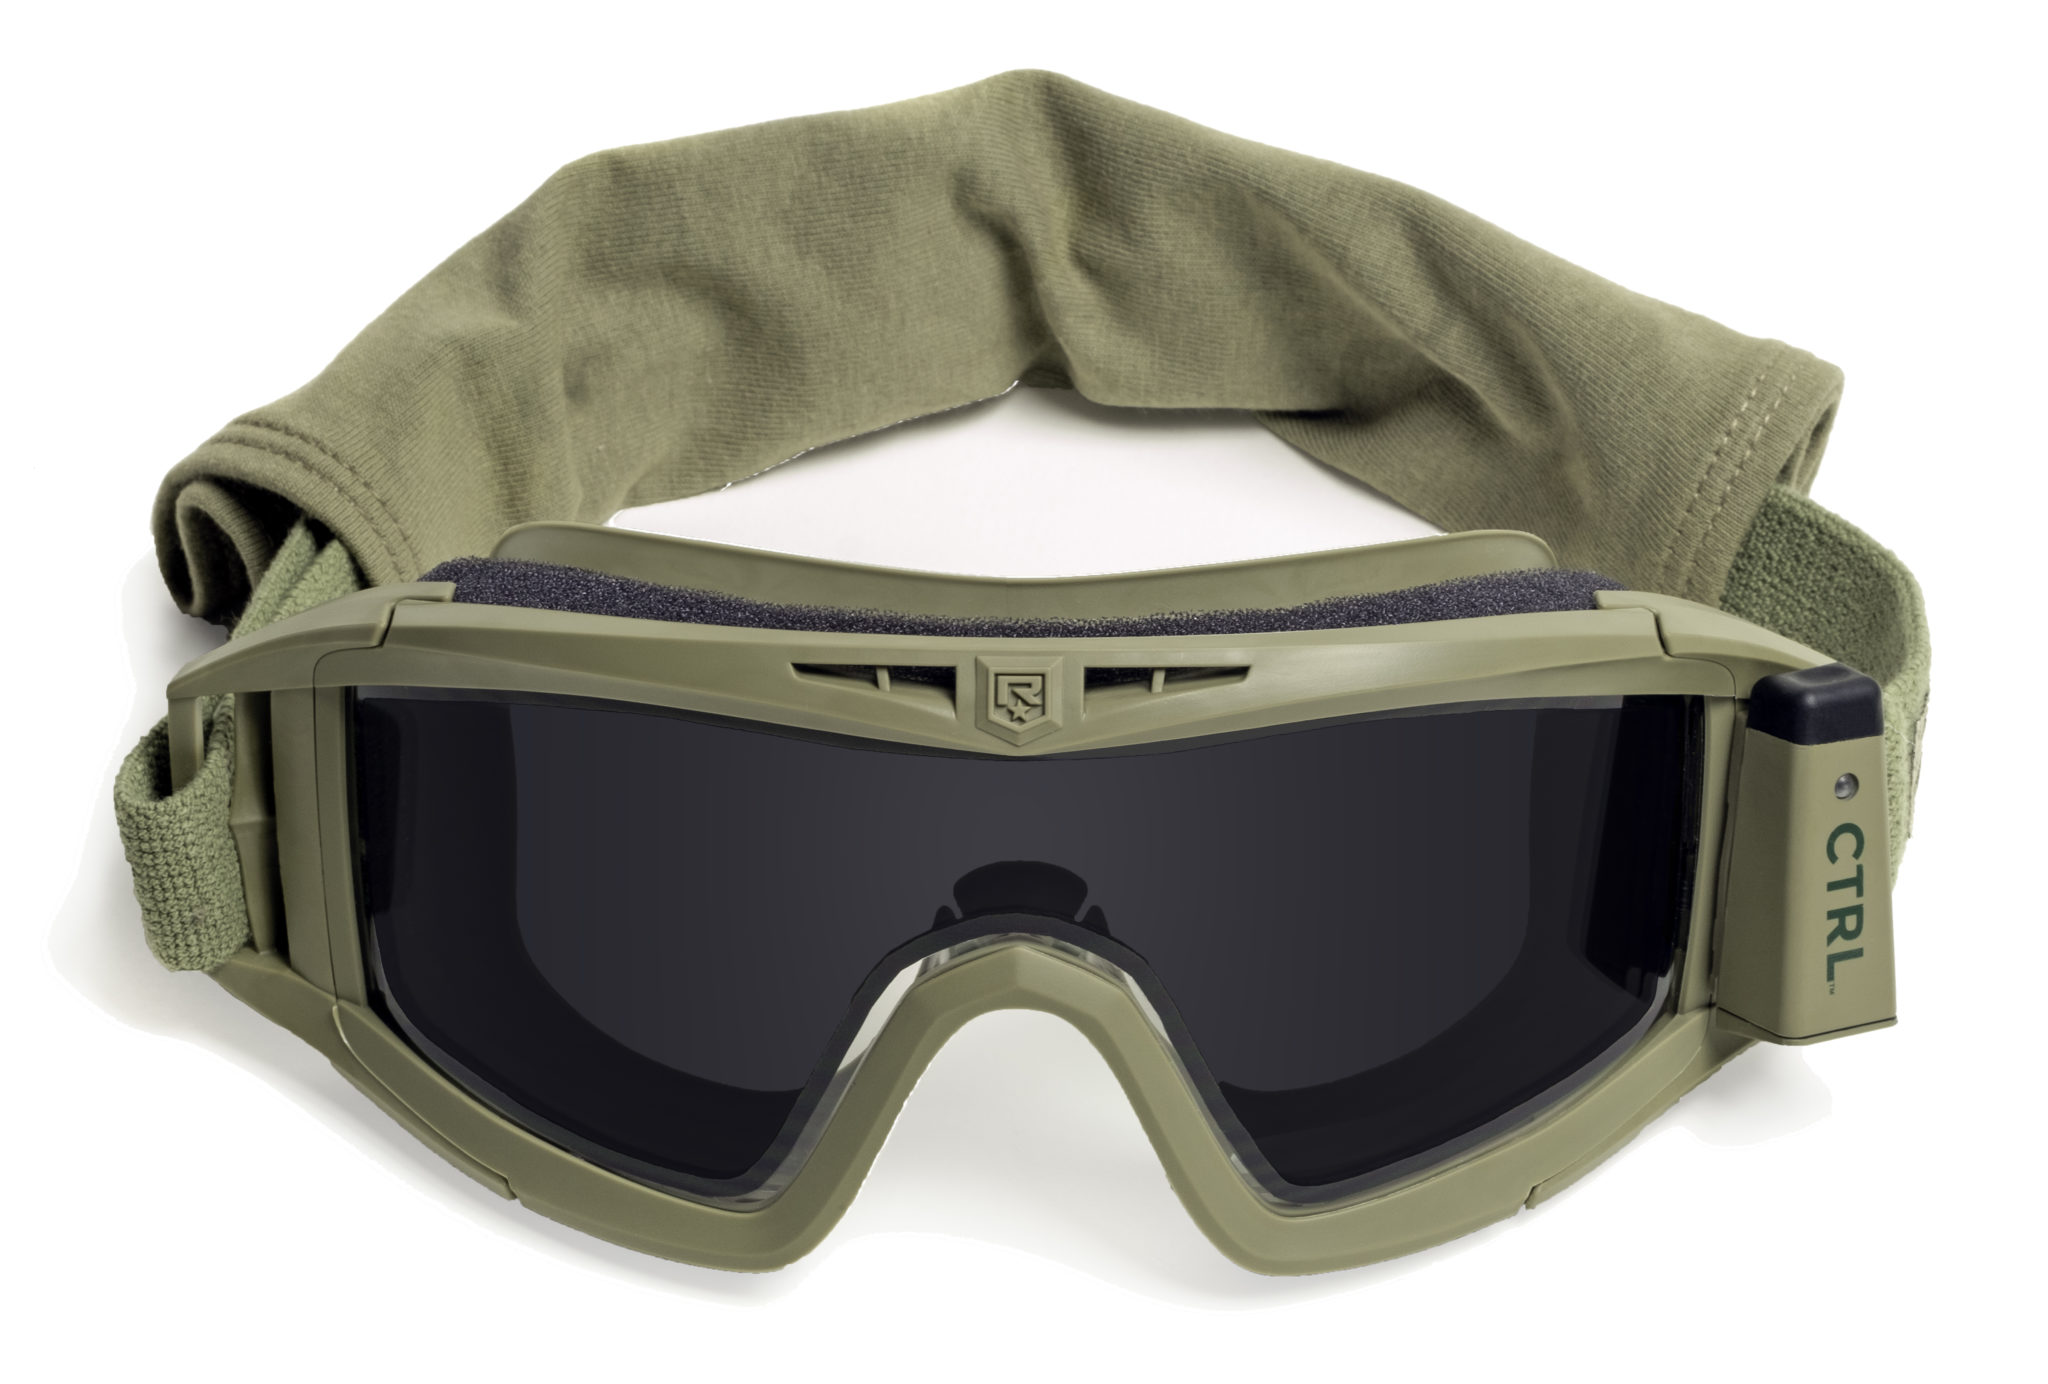 Ballistic Eyewear For The Military Quantico Tactical